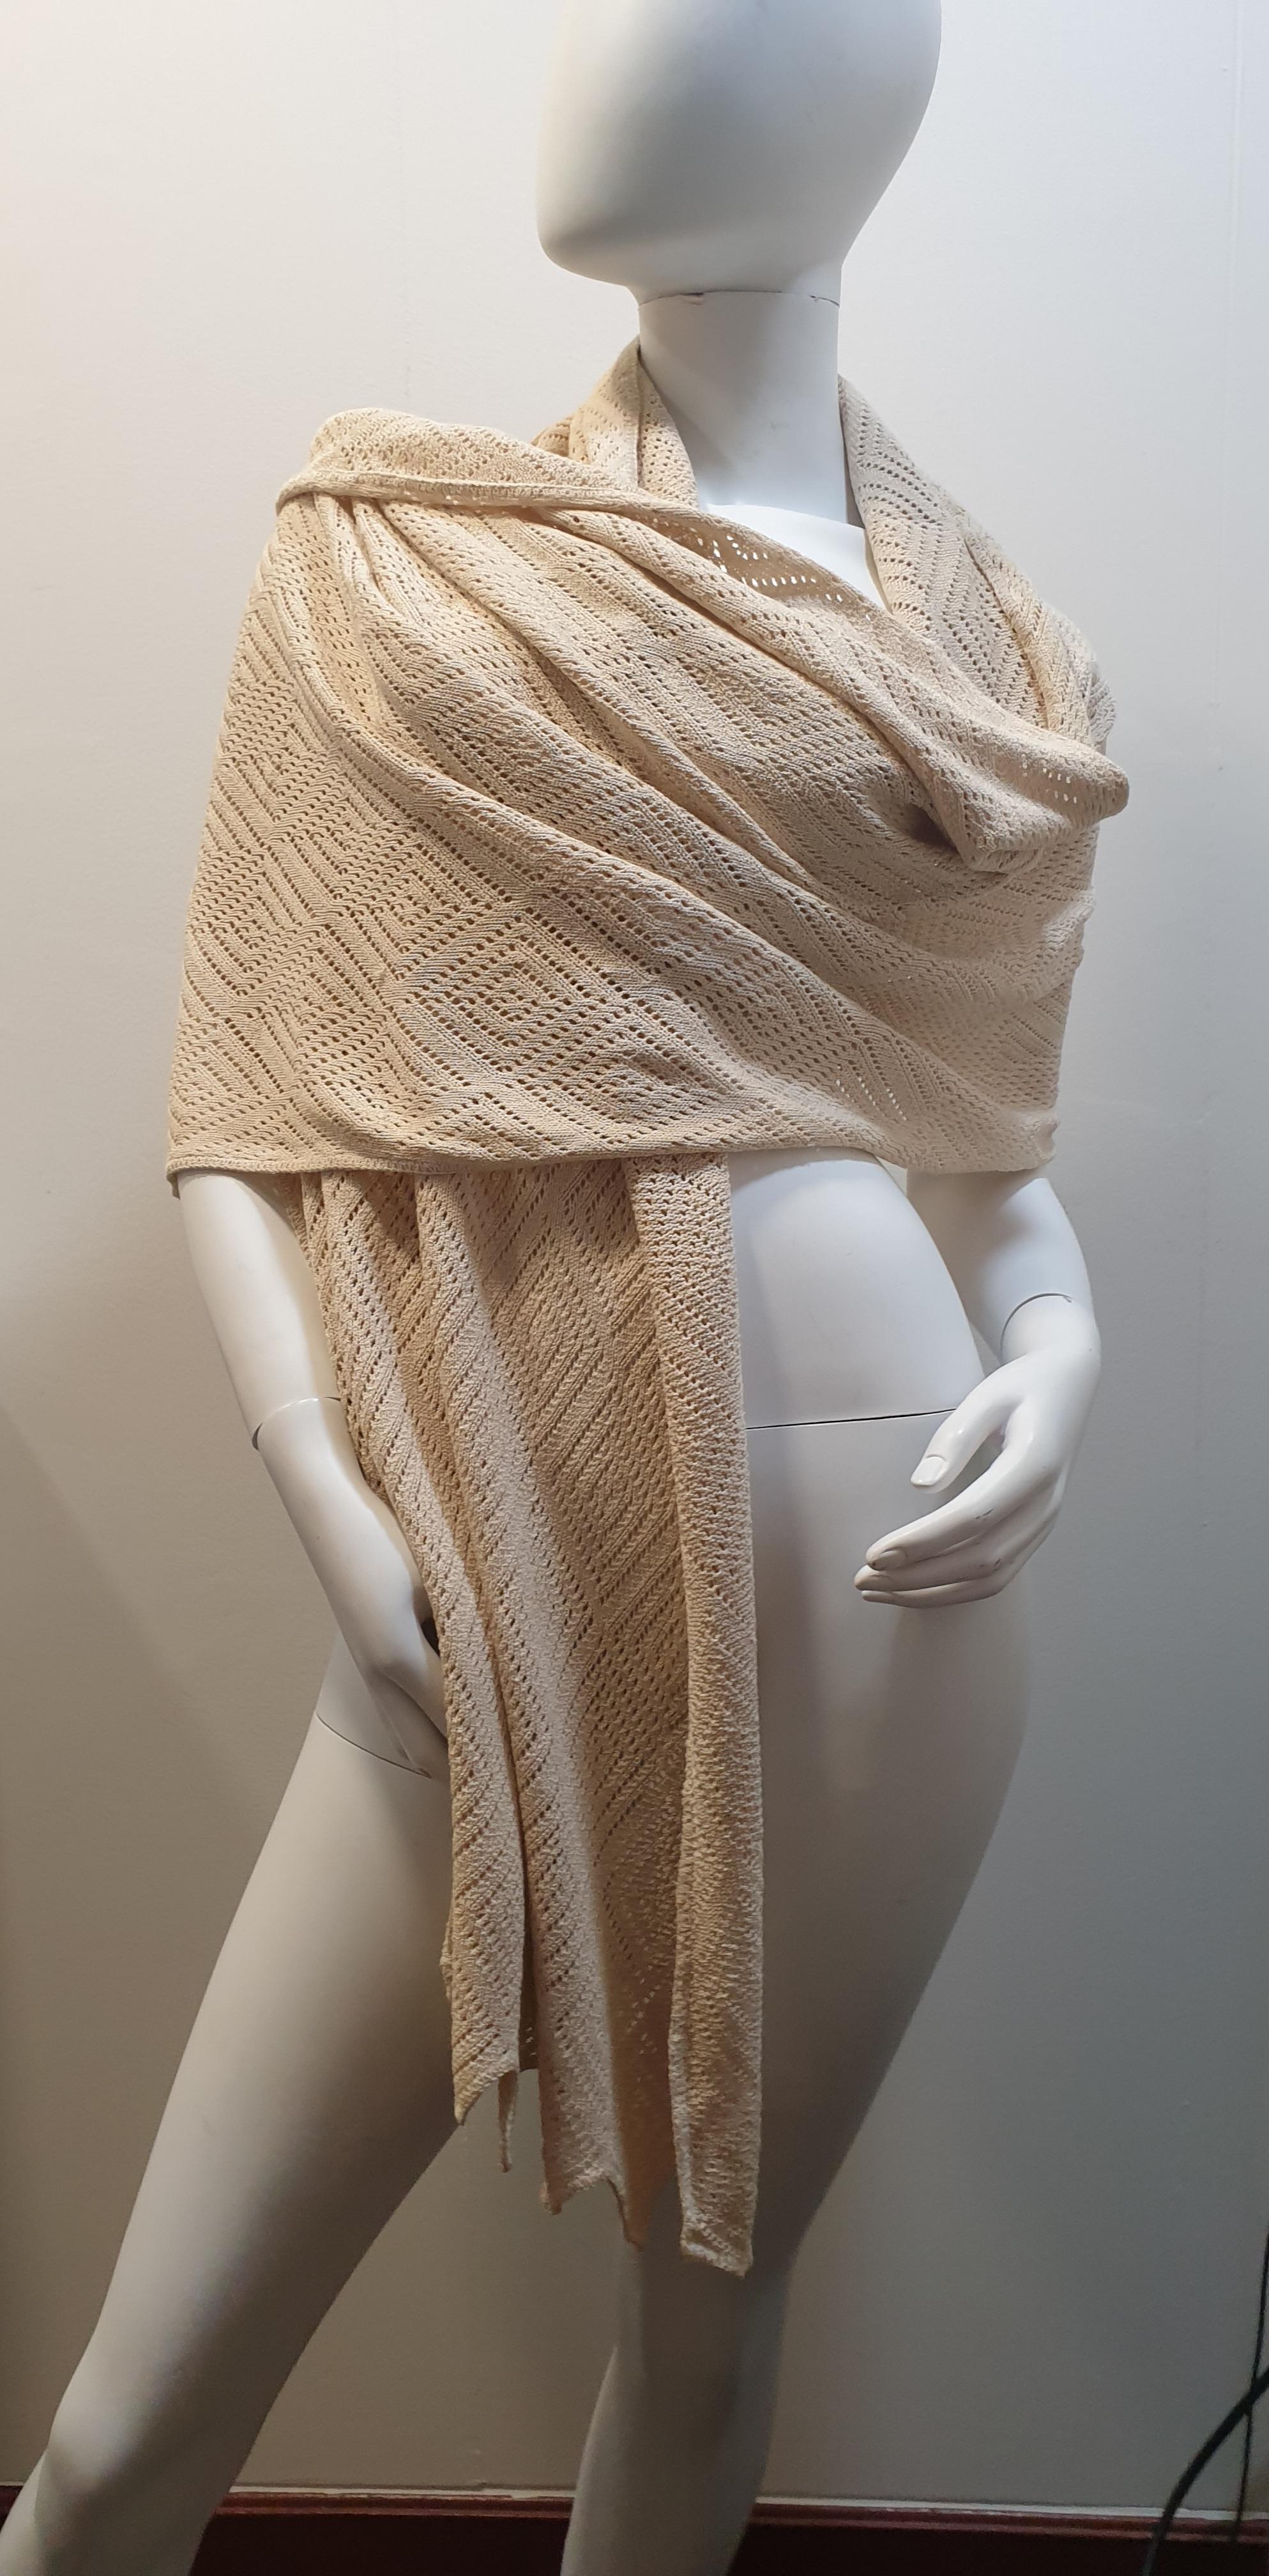 Giorgio Armani Beige Knitted Pashmina with Openwork
Dimensions: 90 x 90 cm / 35,43 x 35,43 inches 



Our Company Fashion Division  is specialized in European Fashion designers, clothing, handbags, accessories and as such we sell original authentic 